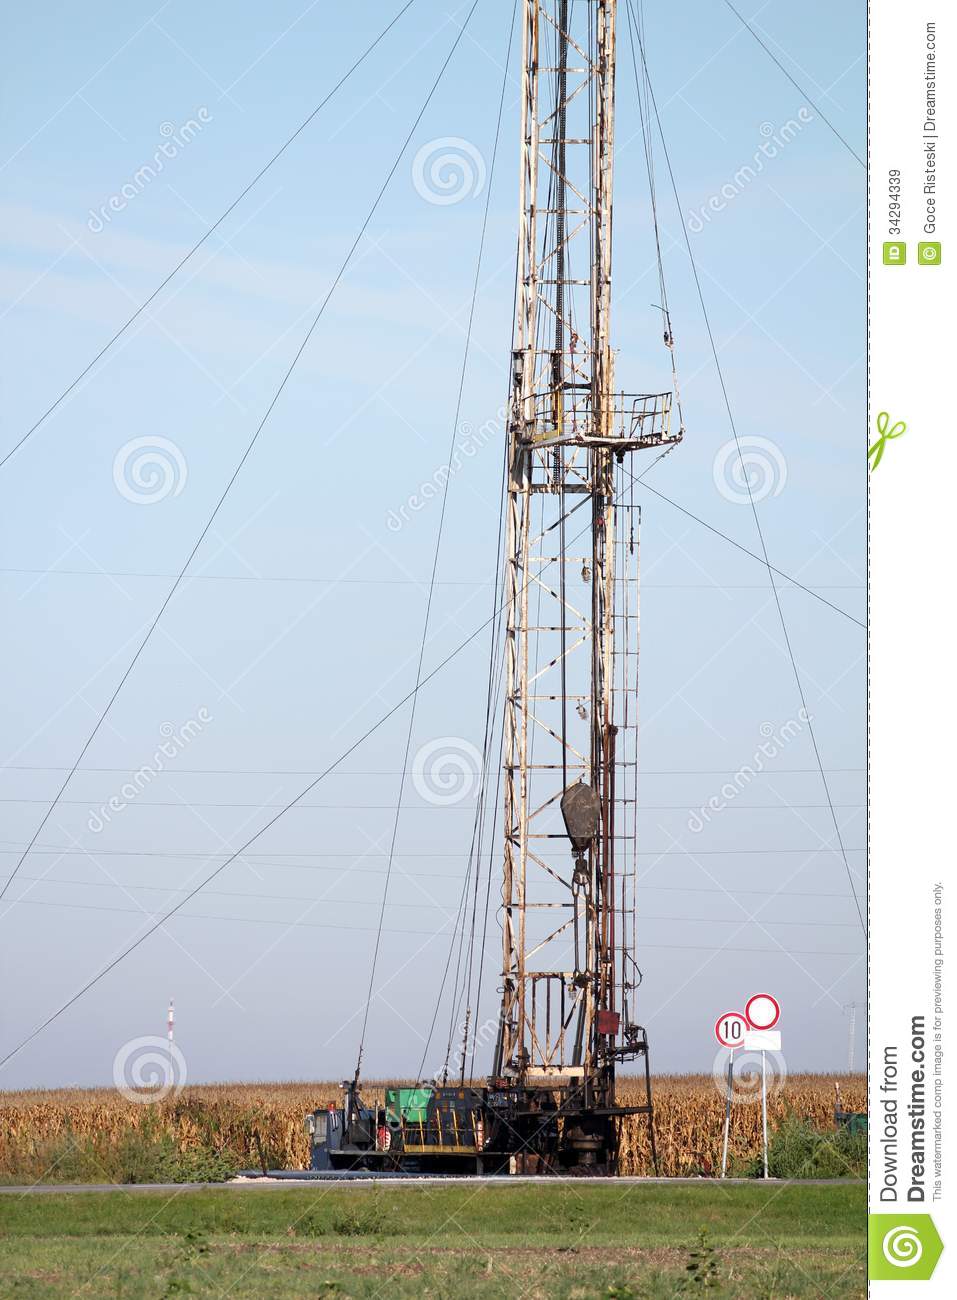 Land Oil Drilling Rig Royalty Free Stock Images   Image  34294339